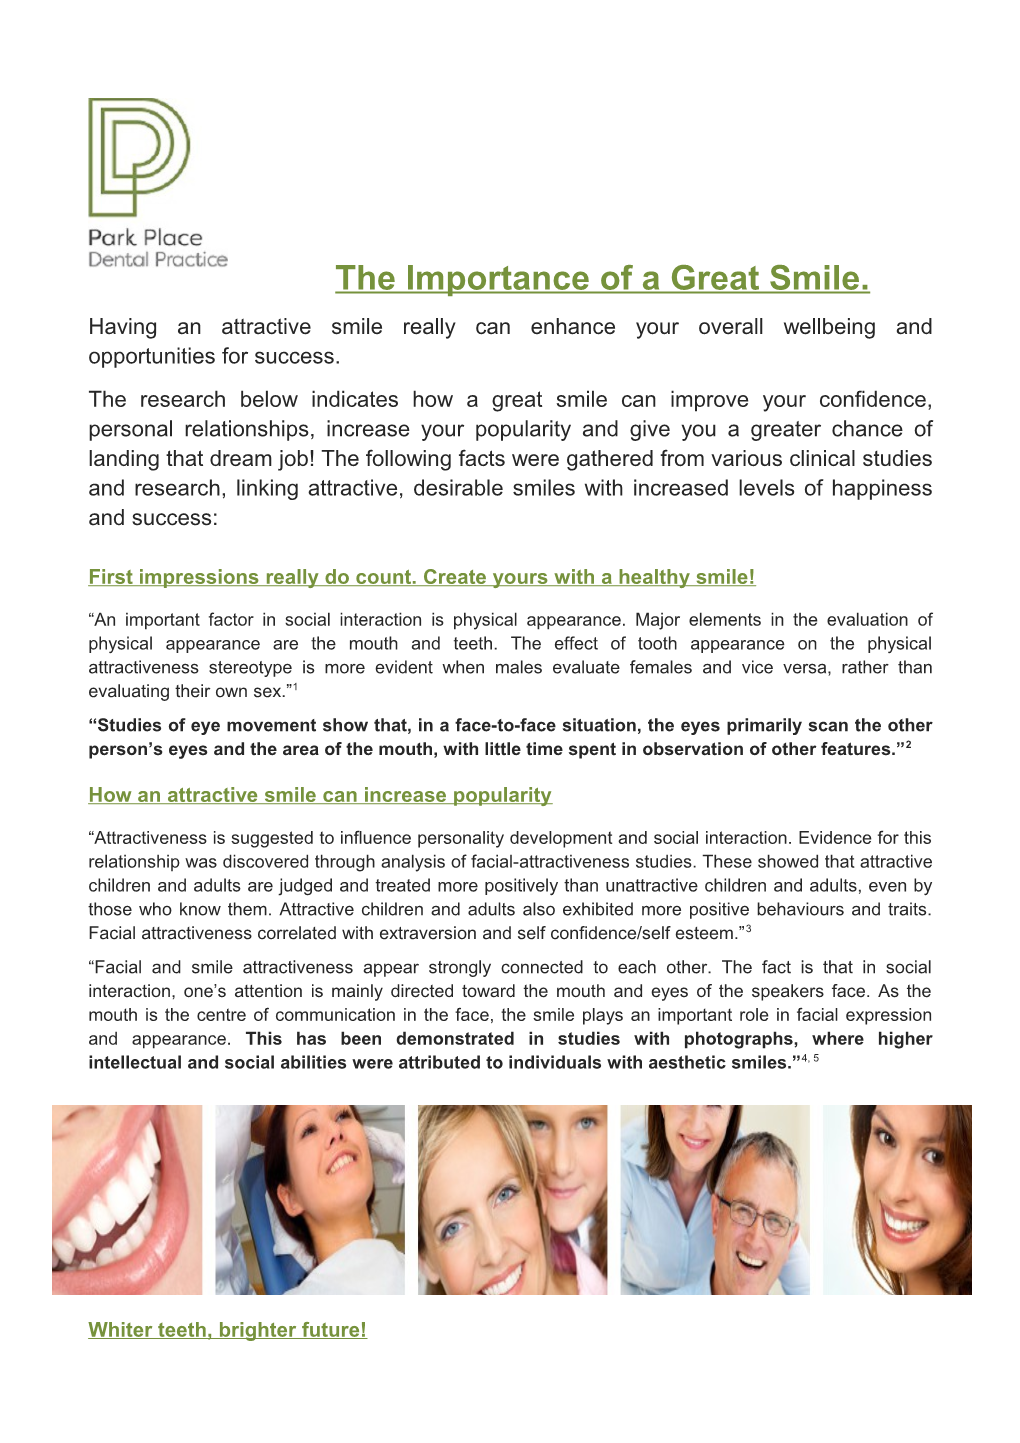 First Impressions Really Do Count. Create Yours with a Healthy Smile!